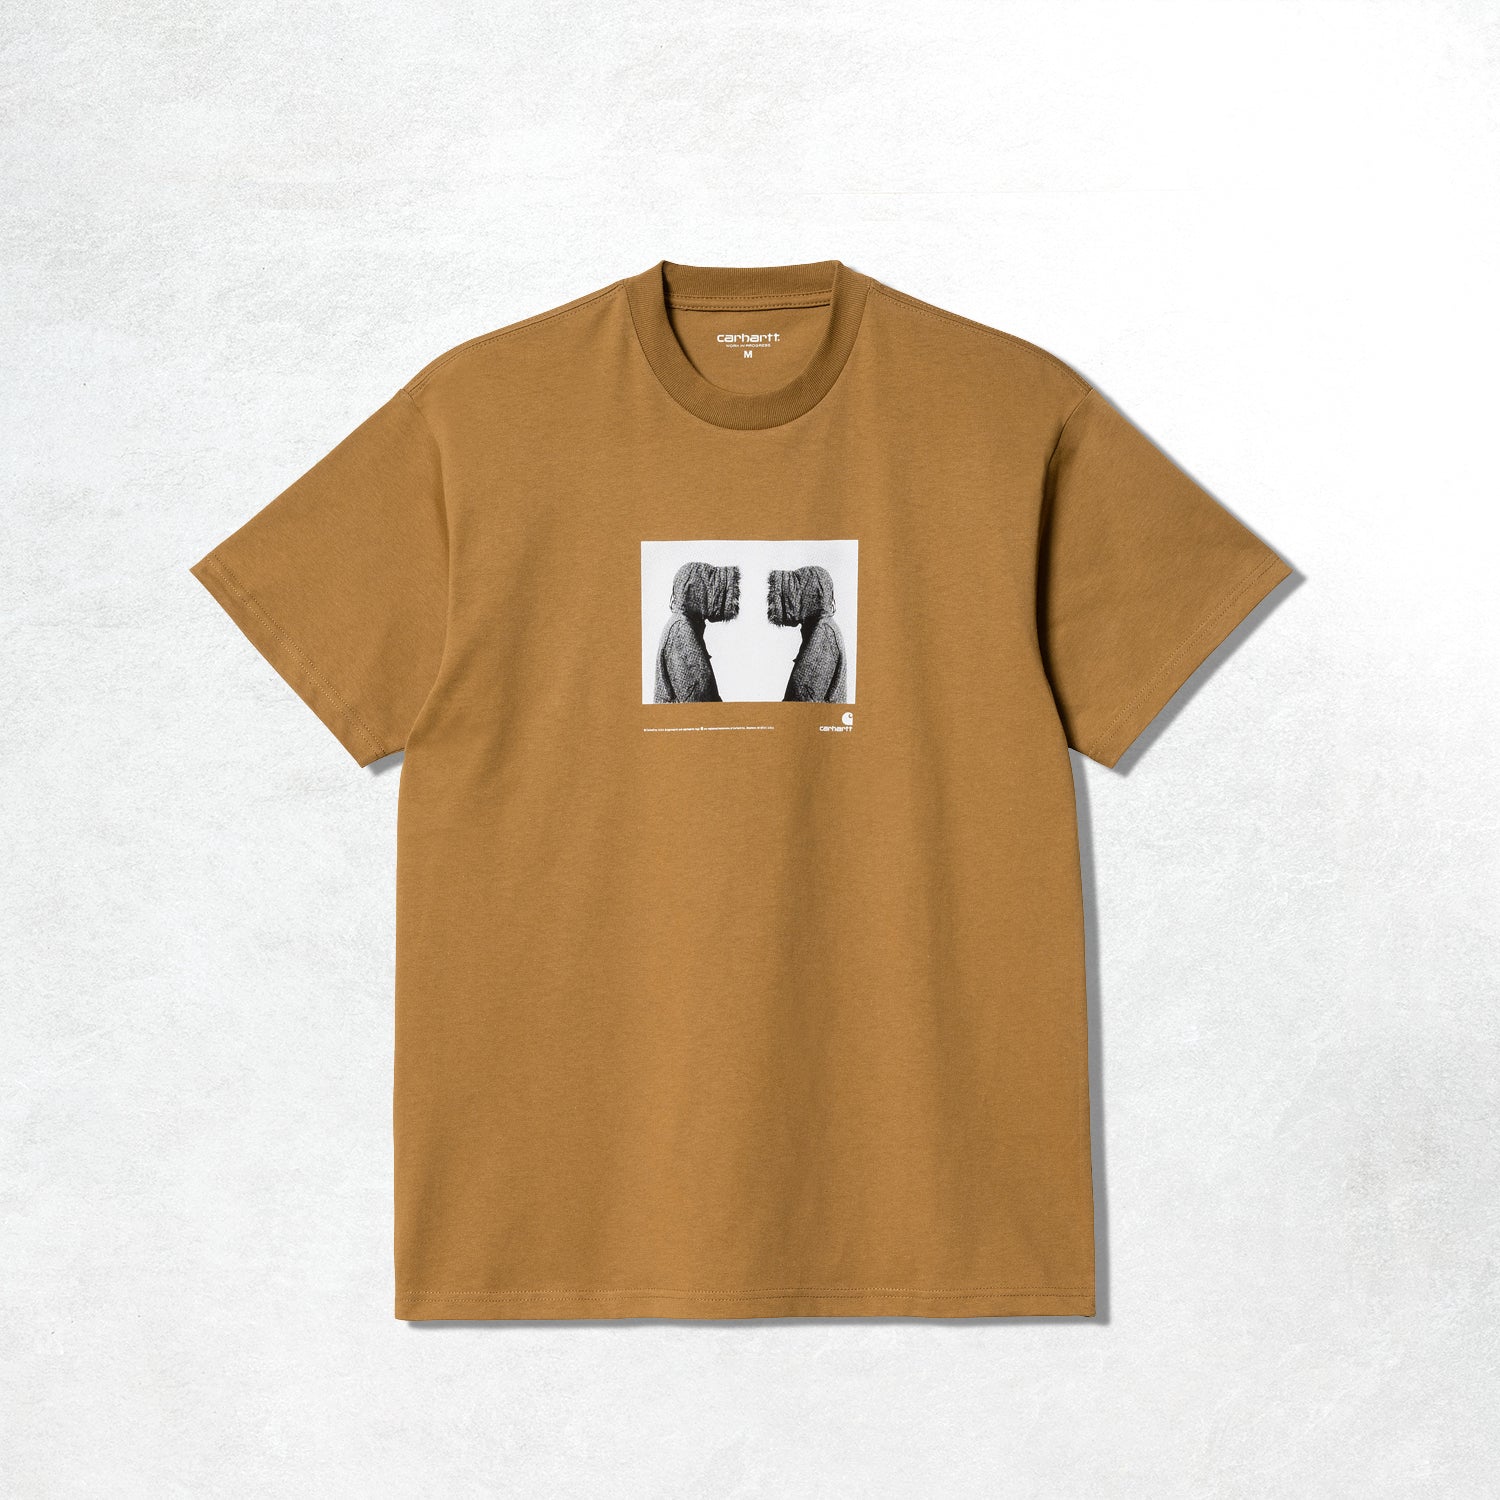 Carhartt WIP S/S Cold T-Shirt: Hamilton Brown (Front)